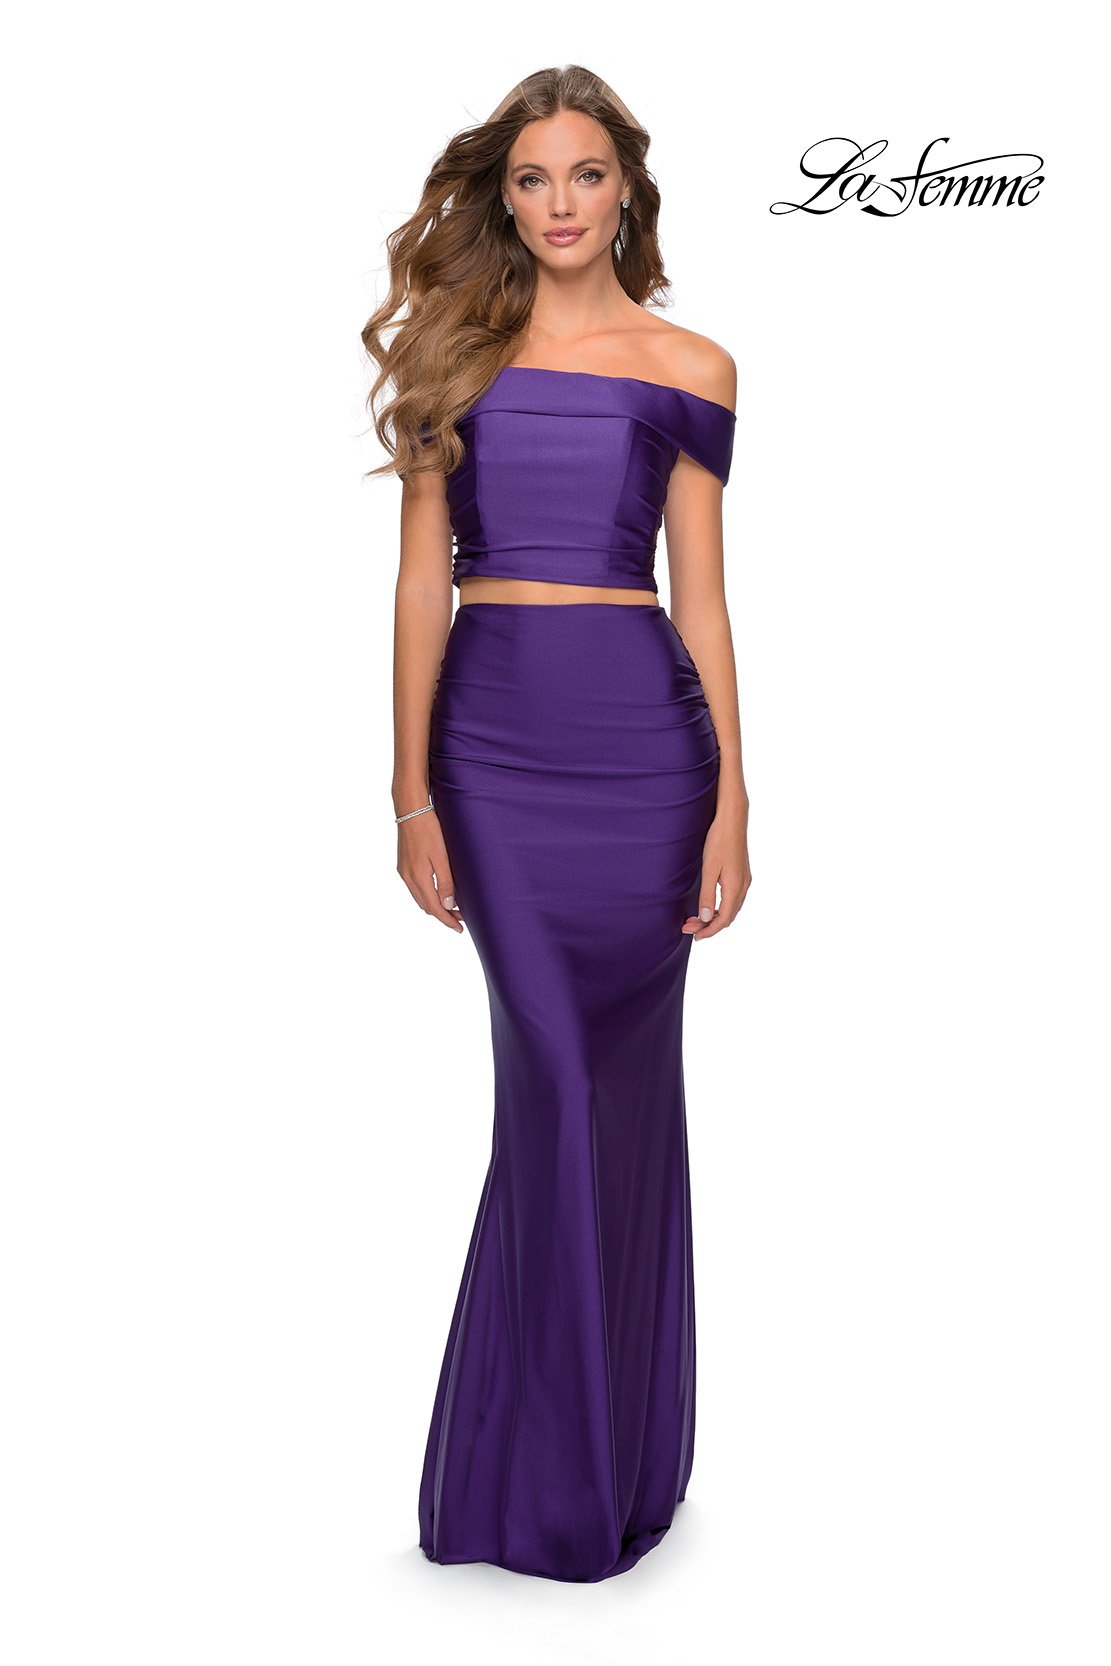 La Femme 28578 dress images in these colors: Red, Royal Blue, Royal Purple.